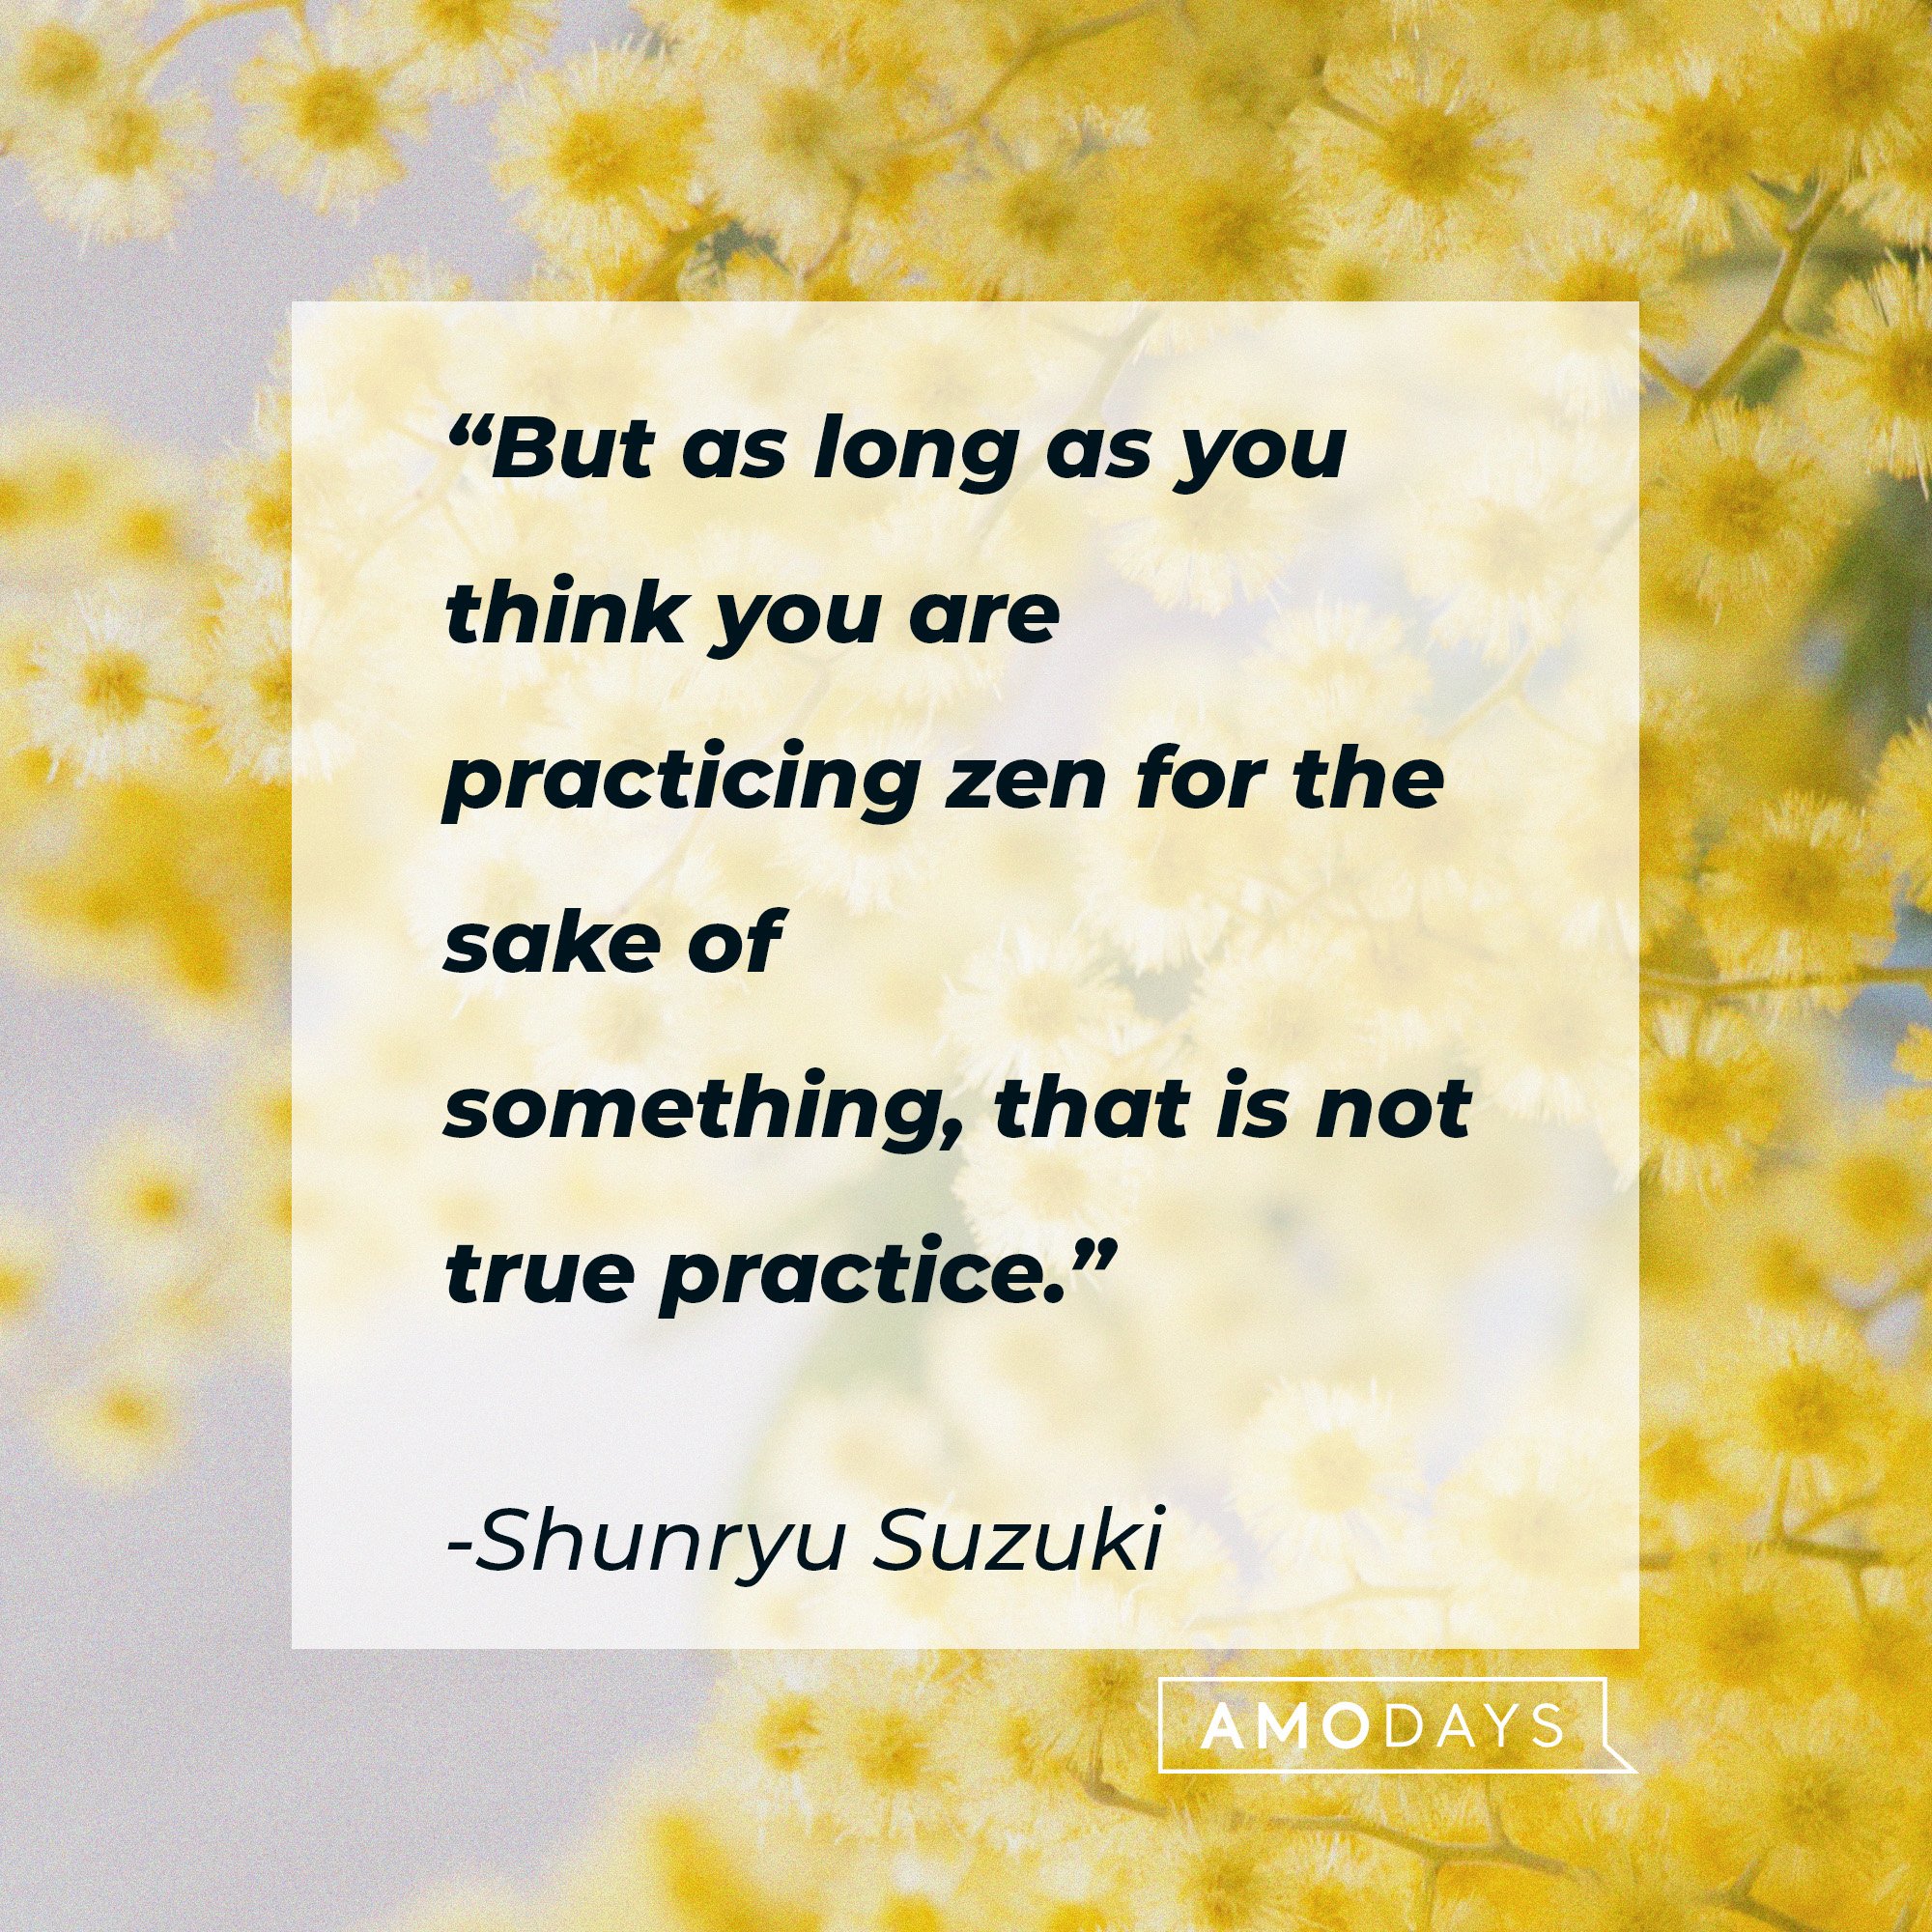 Shunryu Suzuki's quote: “But as long as you think you are practicing zen for the sake of something, that is not true practice.” | Image: AmoDays